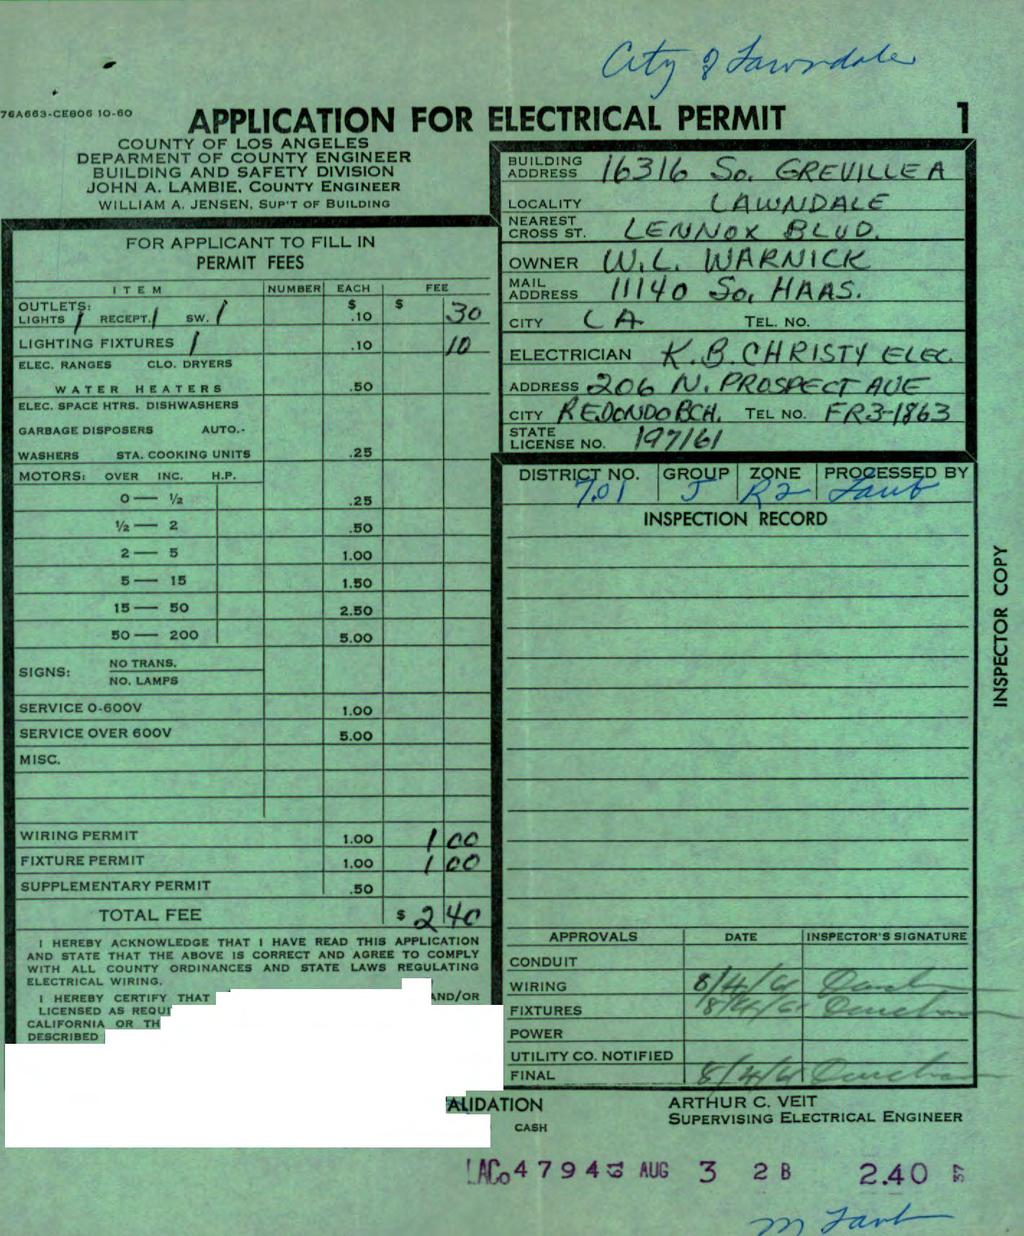 7«Ae63.ClSOe 10-60 APPLICATION FOR ELECTRICAL PERMIT 1 DEPARMENT OF COUNTY ENGINEER JOHN A. LAMBIE. COUNTY ENGINEER Wl LLIAM A. JENSEN, Sup'T OF BUILDING OUTLETJ HZC^PT.f 6W.